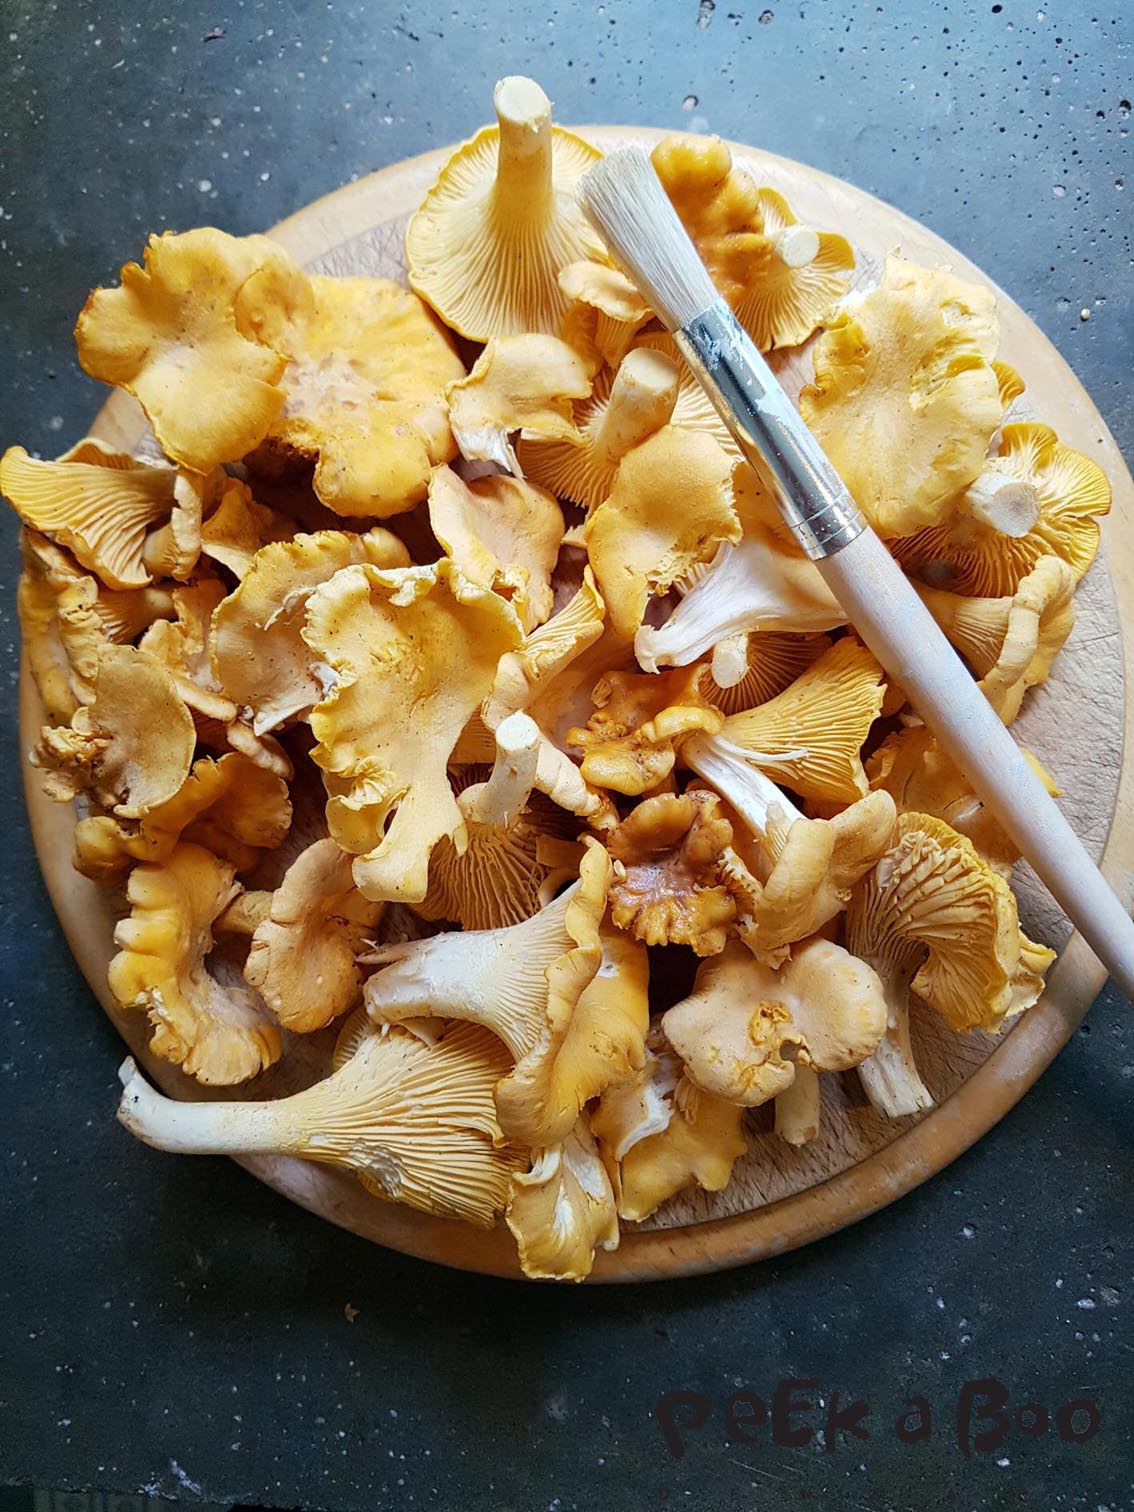 cleaned chanterelles ready to be put on the pan.